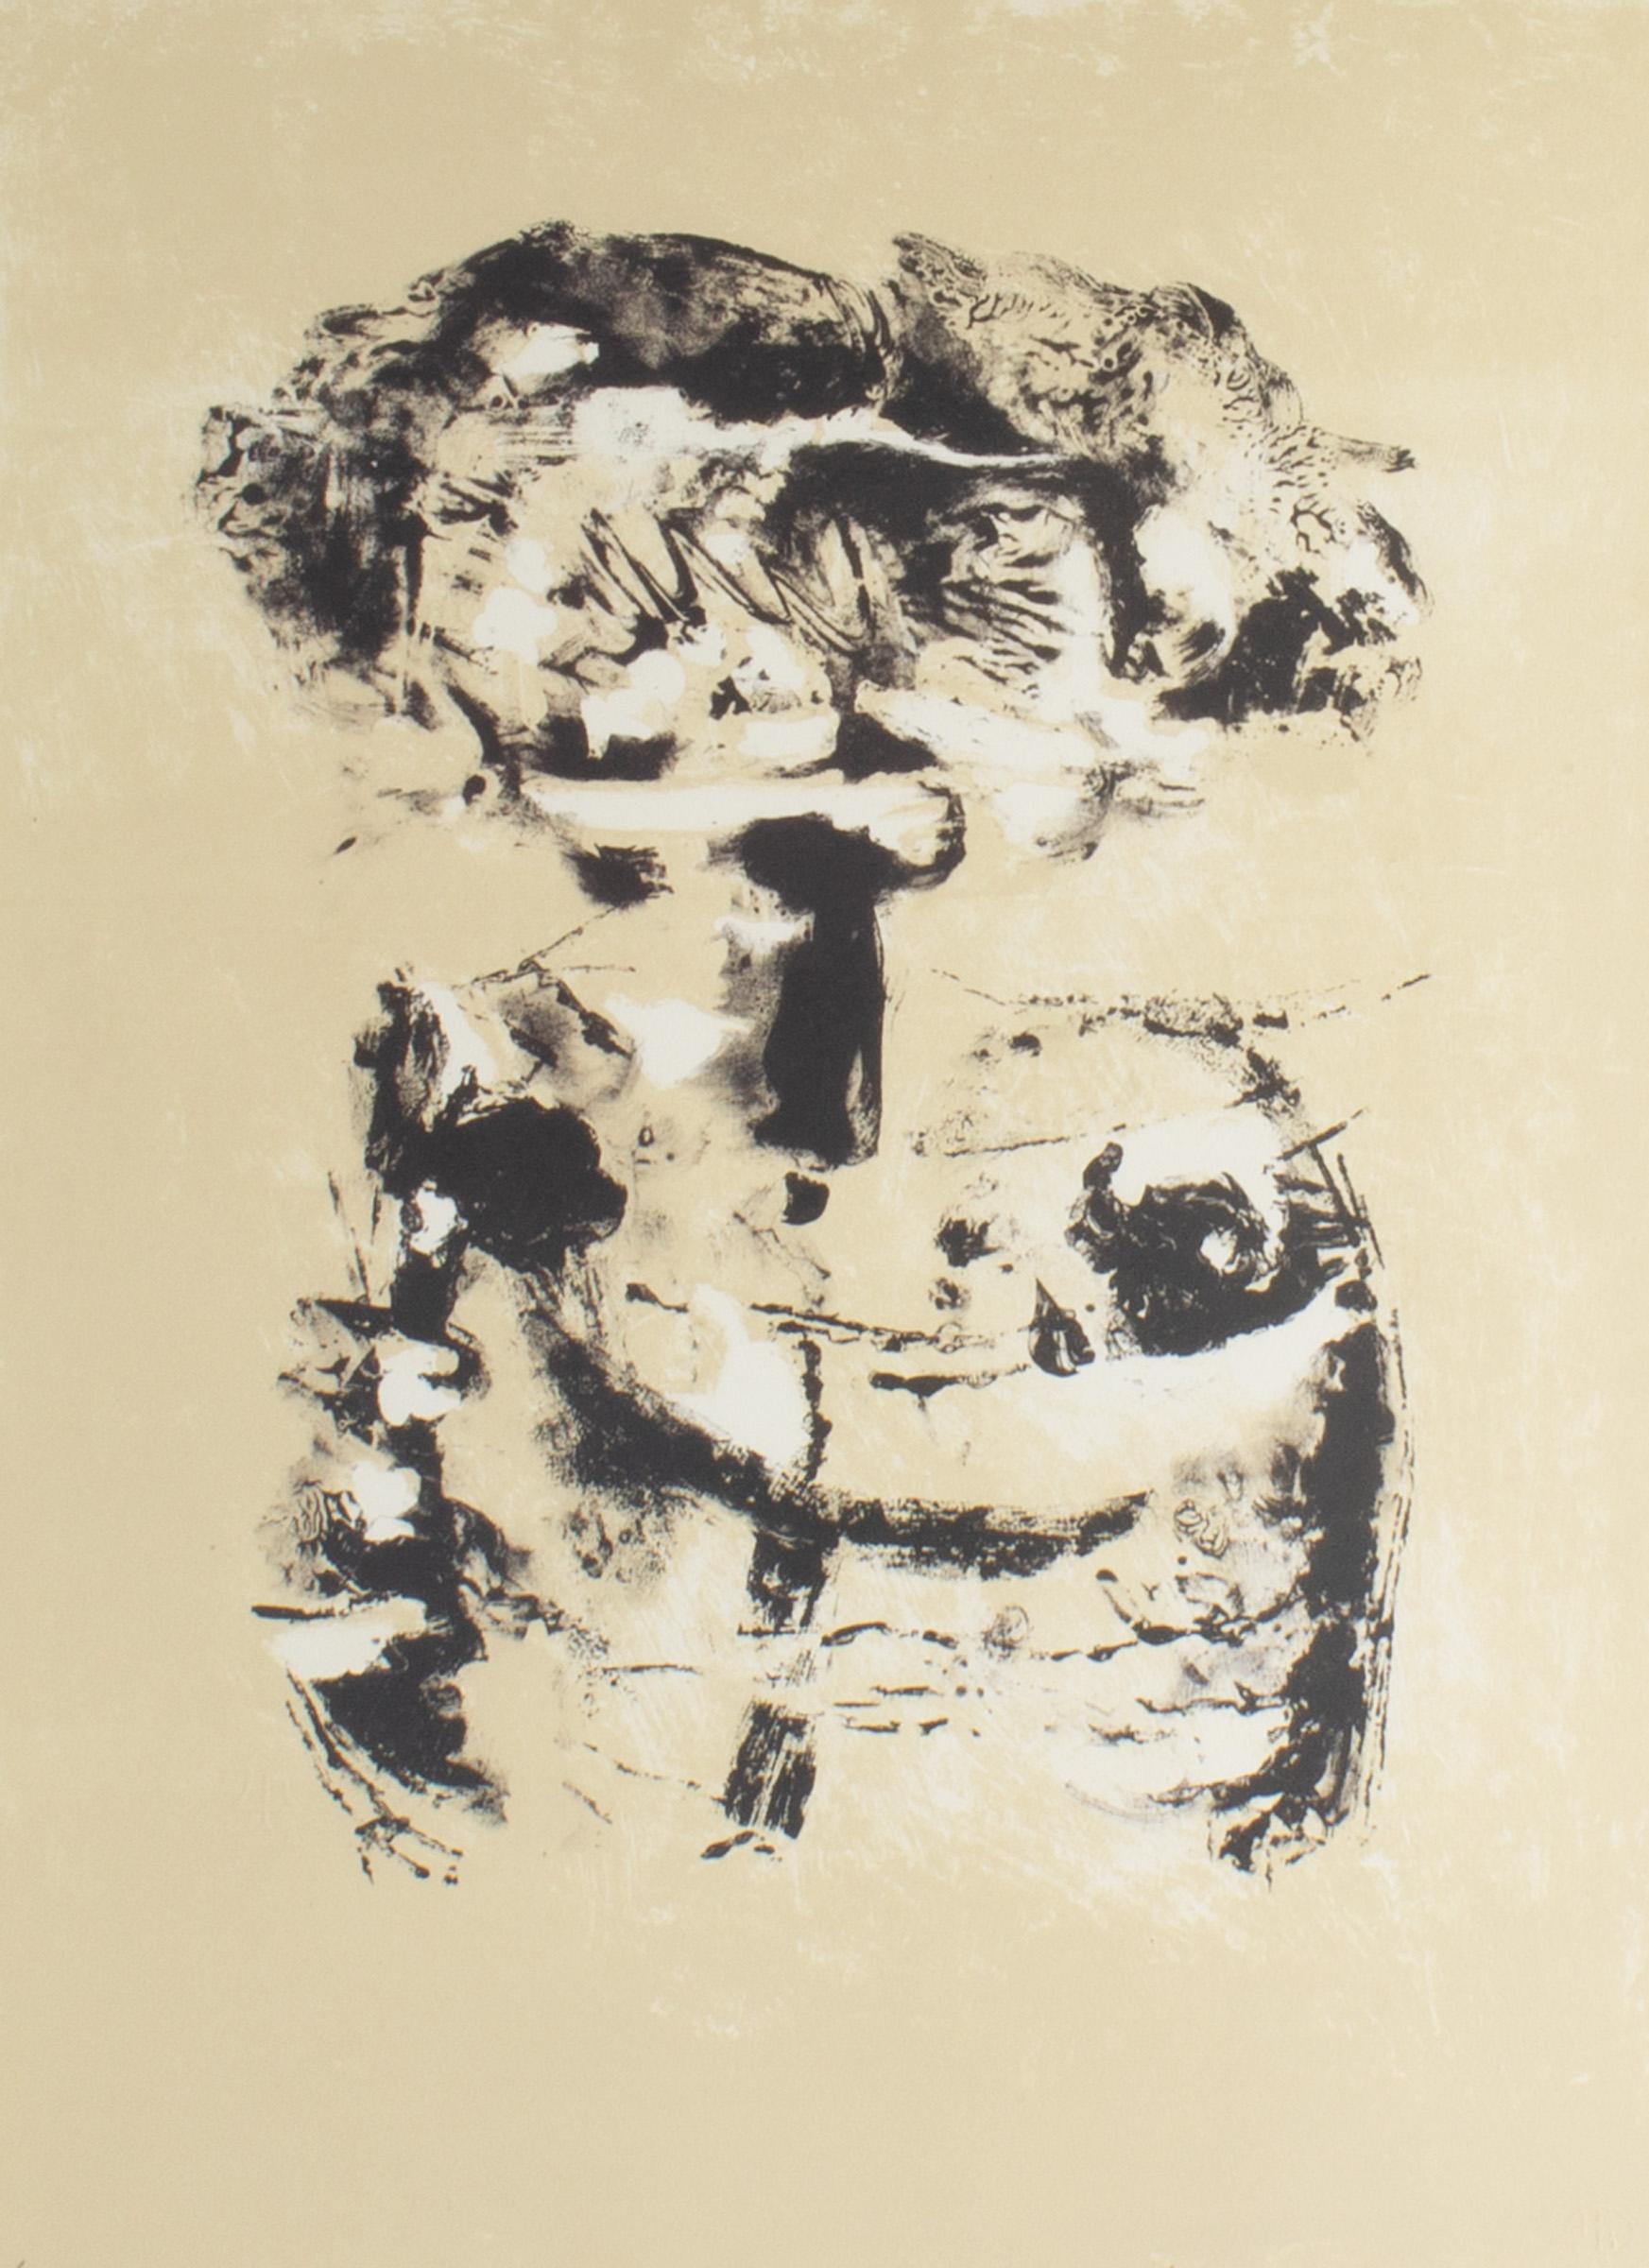 A 1960s limited edition lithograph titled Salt IV by the Russian-American artist Adja Yunkers (1900-1983). This abstract work features a black and white form against a tan background. Signed to the lower right, the print is numbered 89/100R to the